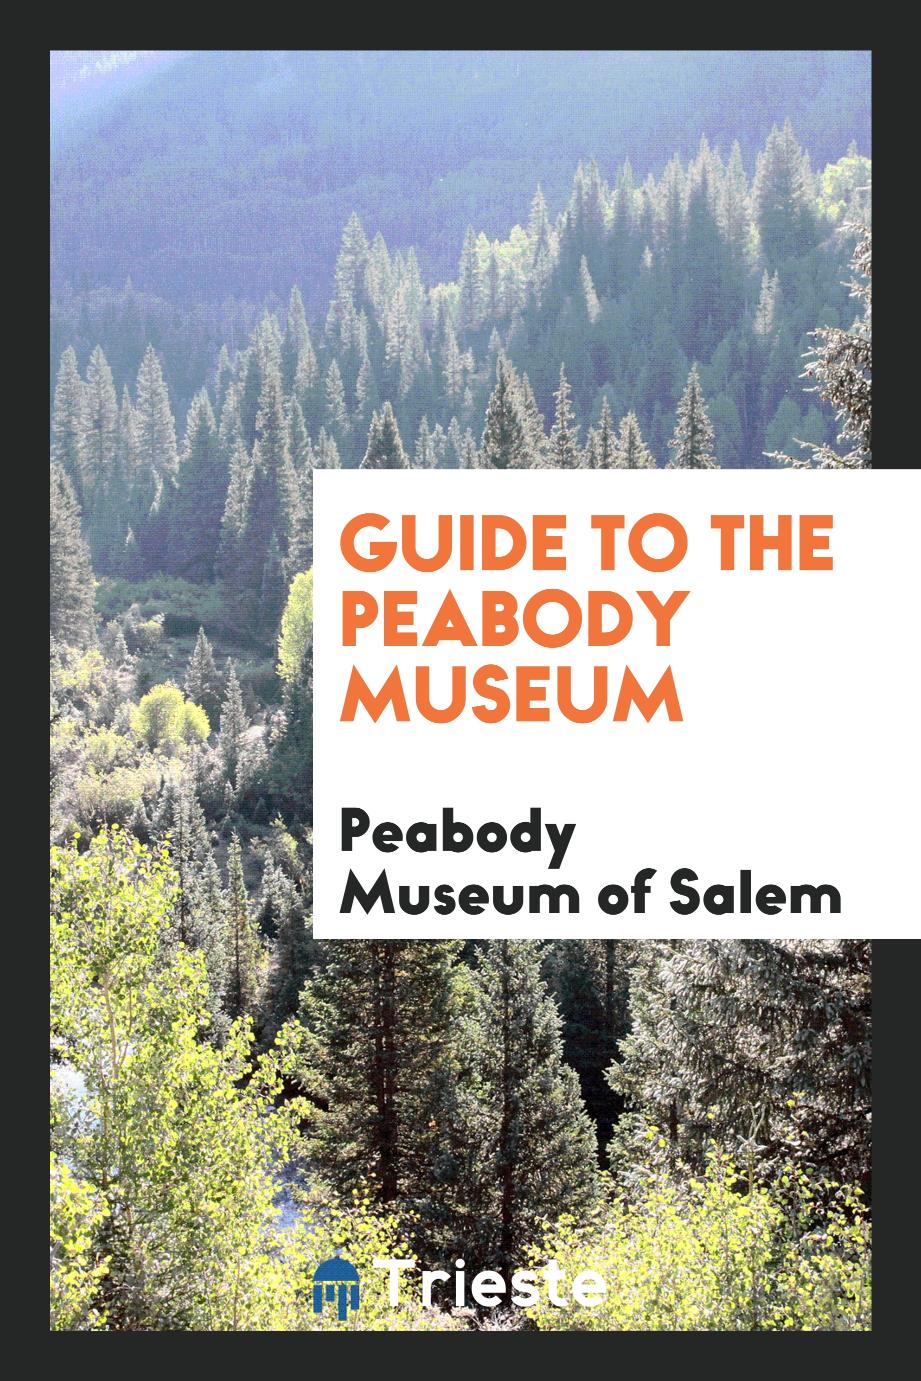 Guide to the Peabody museum